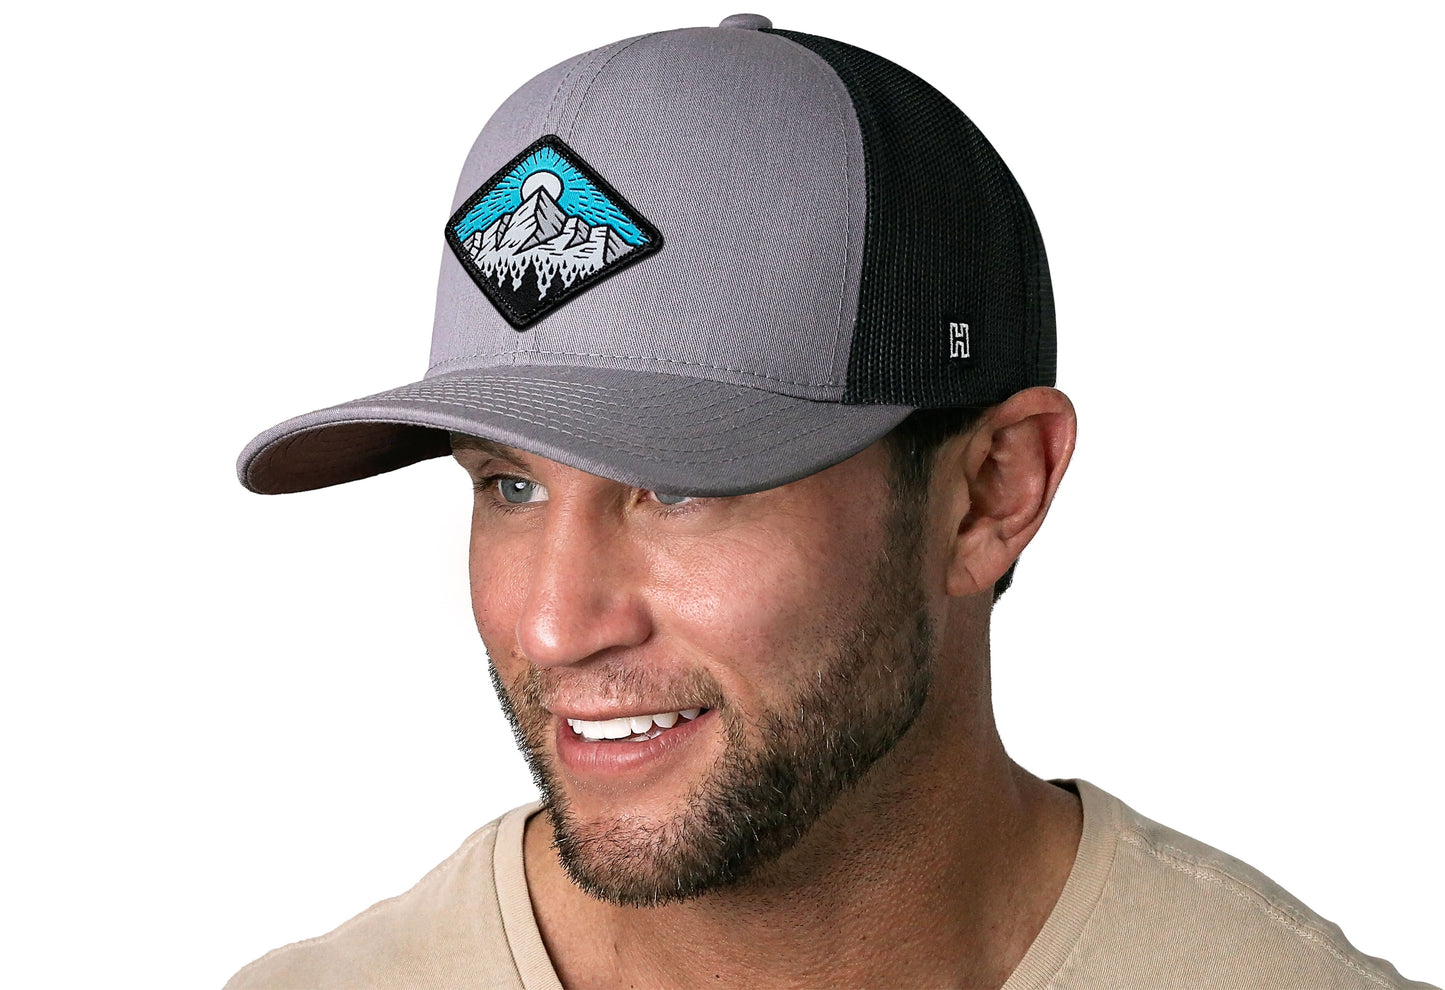 Mountains and Trees Trucker Hat  |  Gray Black Outdoors Snapback